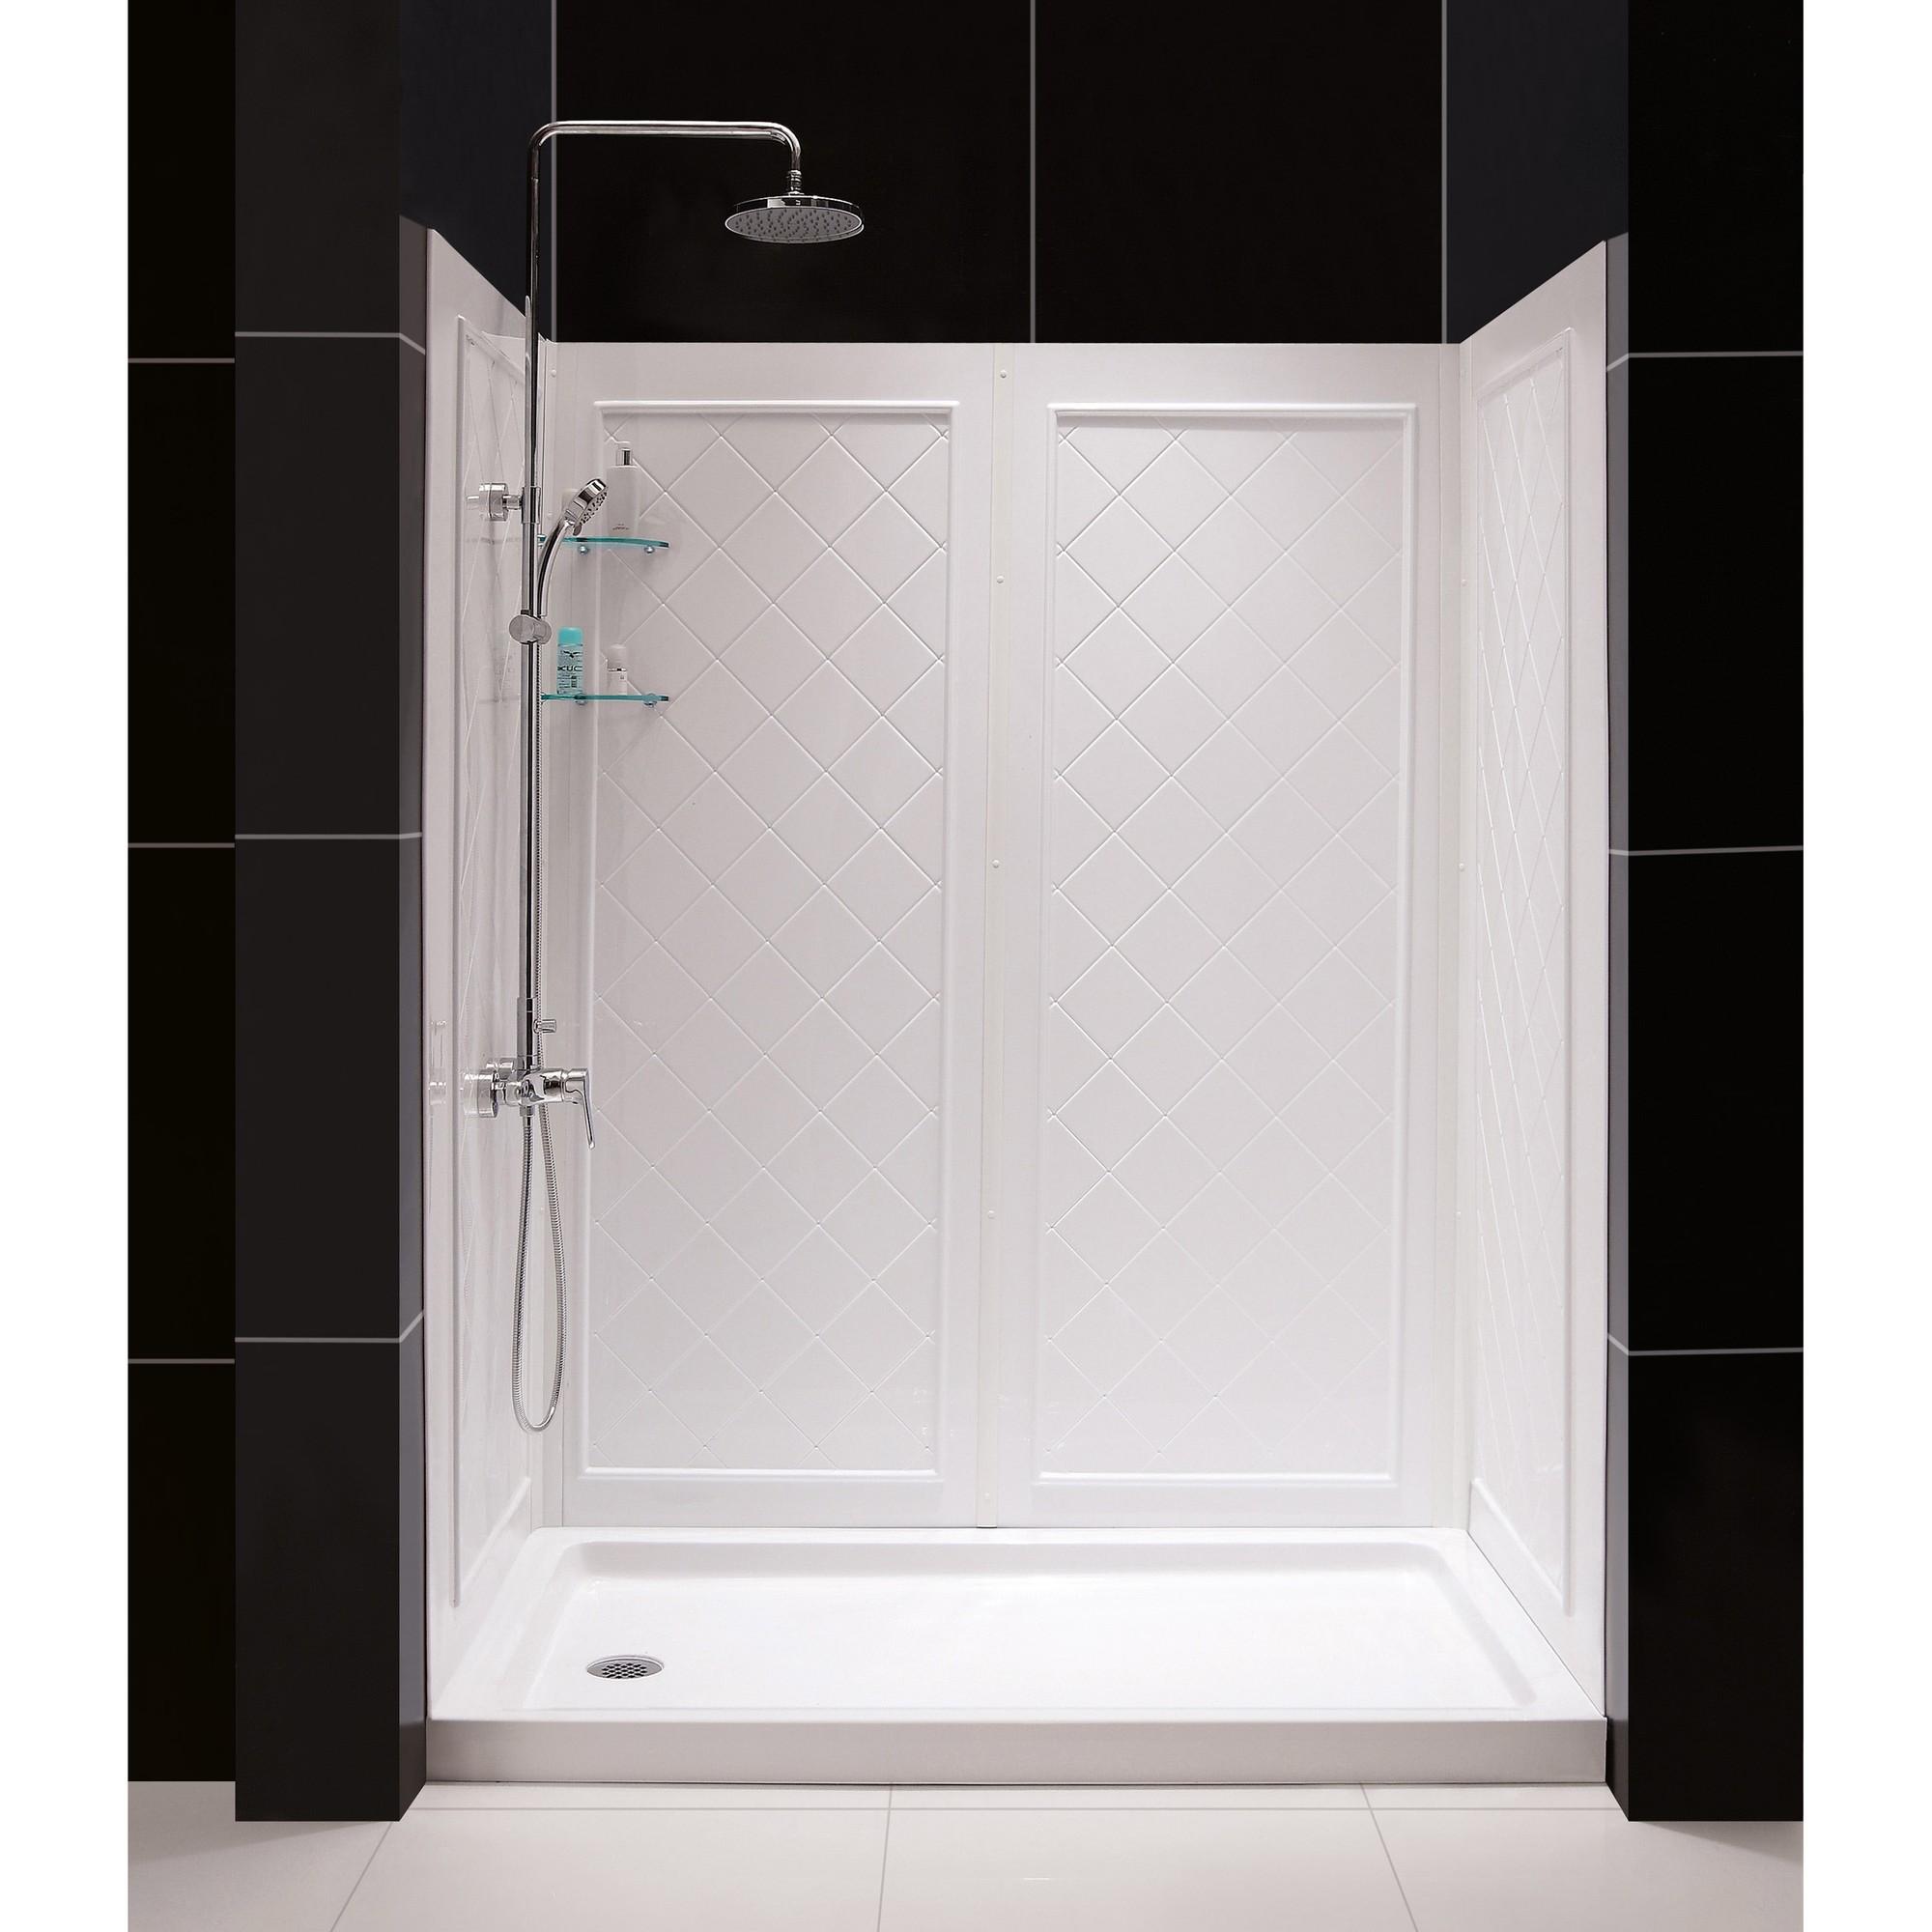 SlimLine 36" by 60" Single Threshold Shower Base and QWALL-5 Shower Backwall Kit